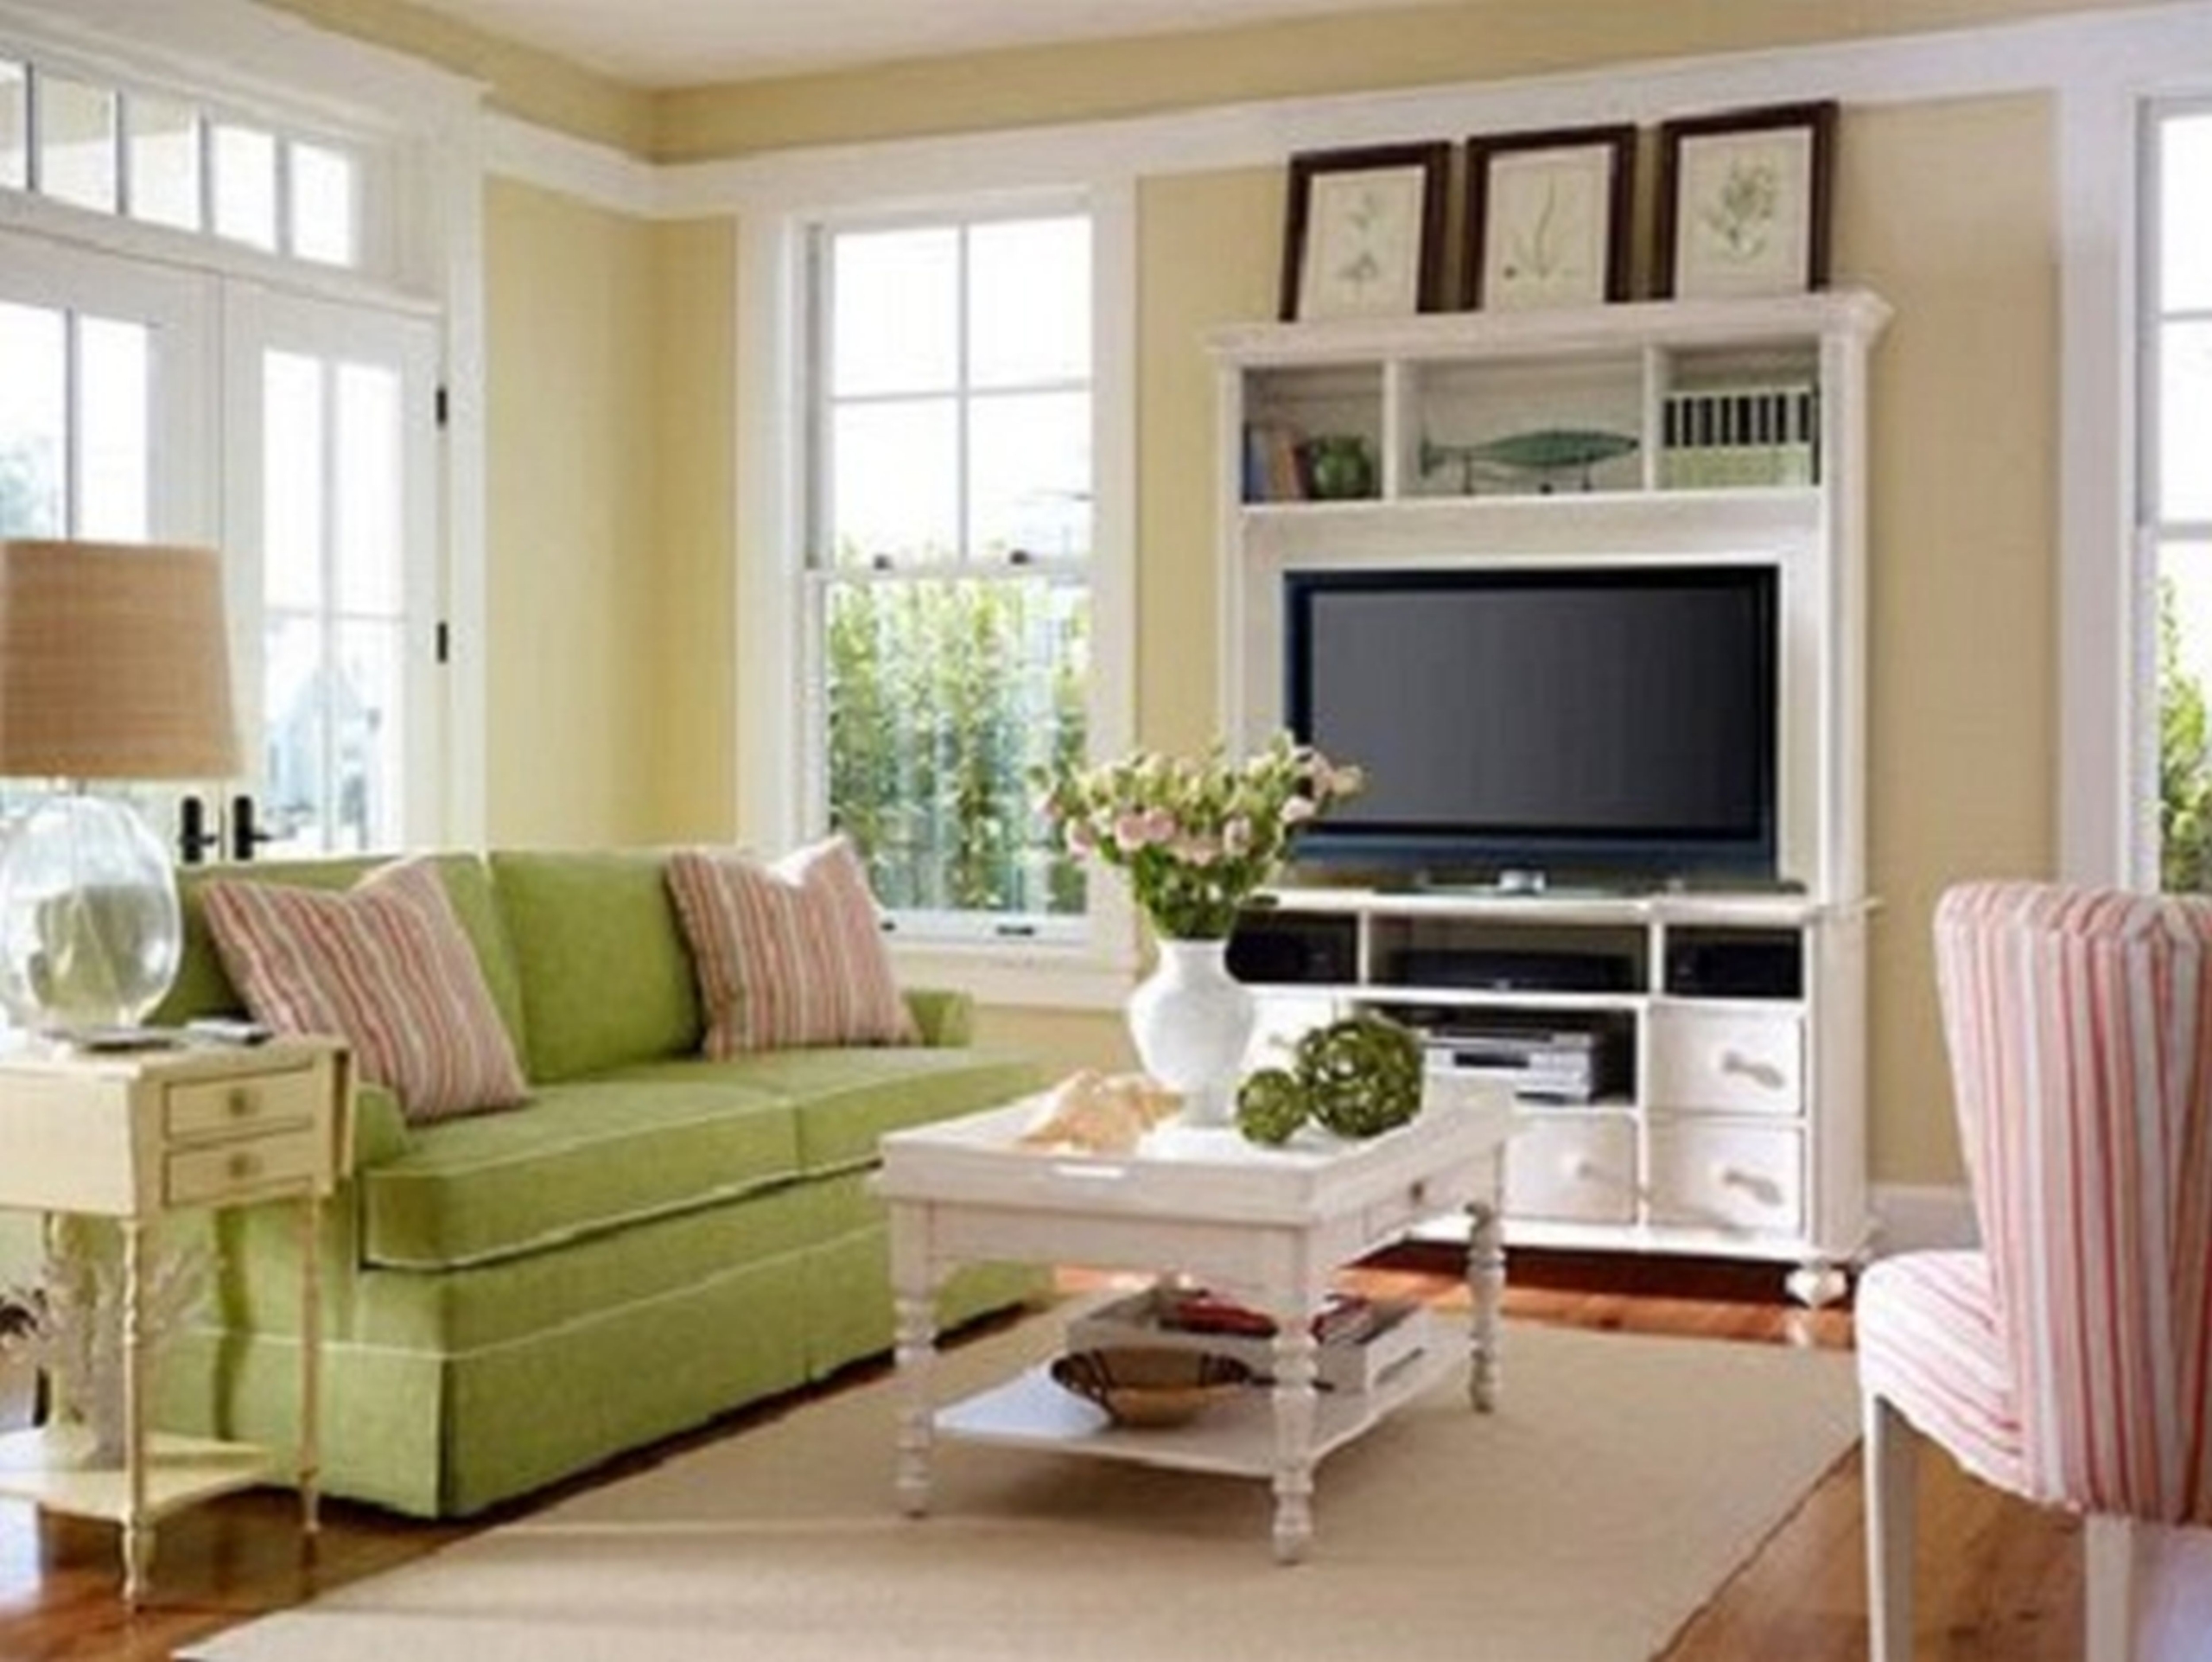 Get the most from your living room furniture